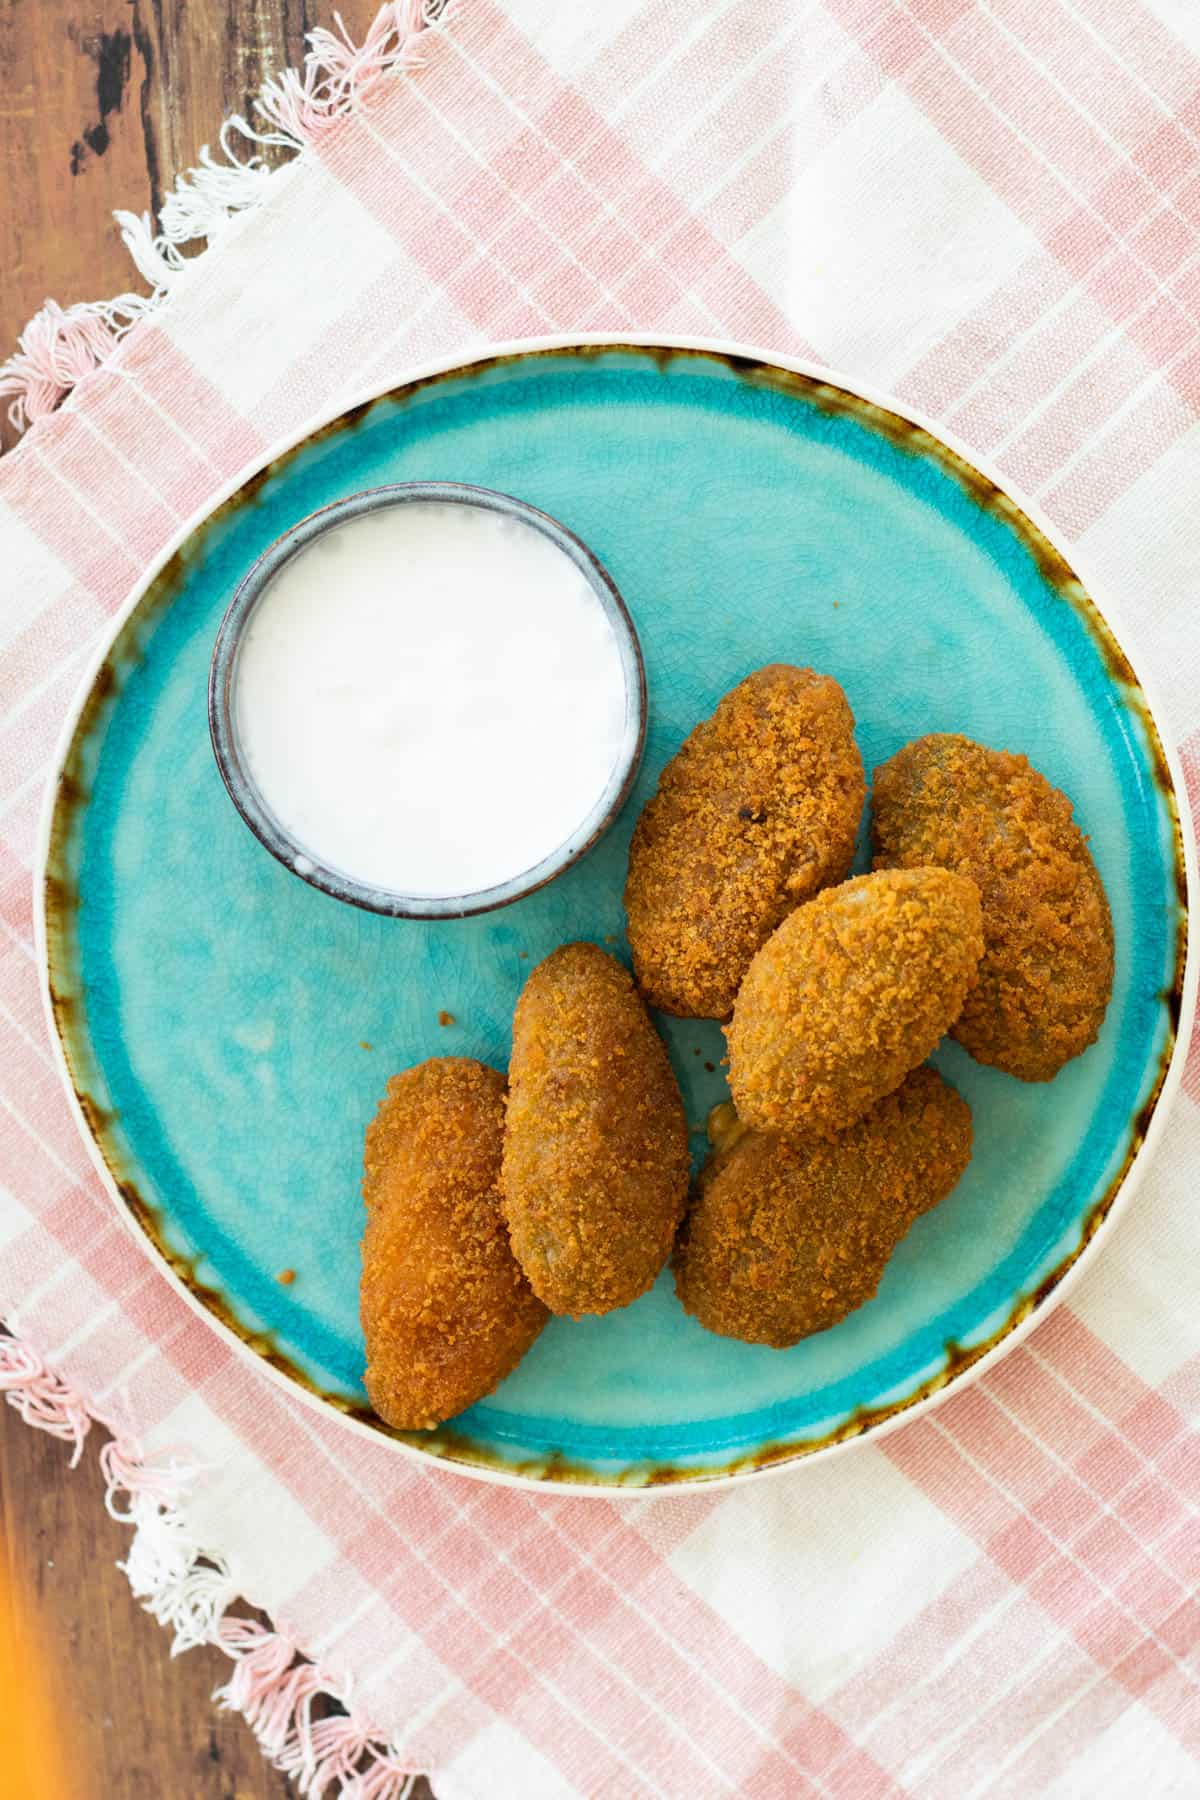 jalapeño poppers on a blue plate with a dip sauce.